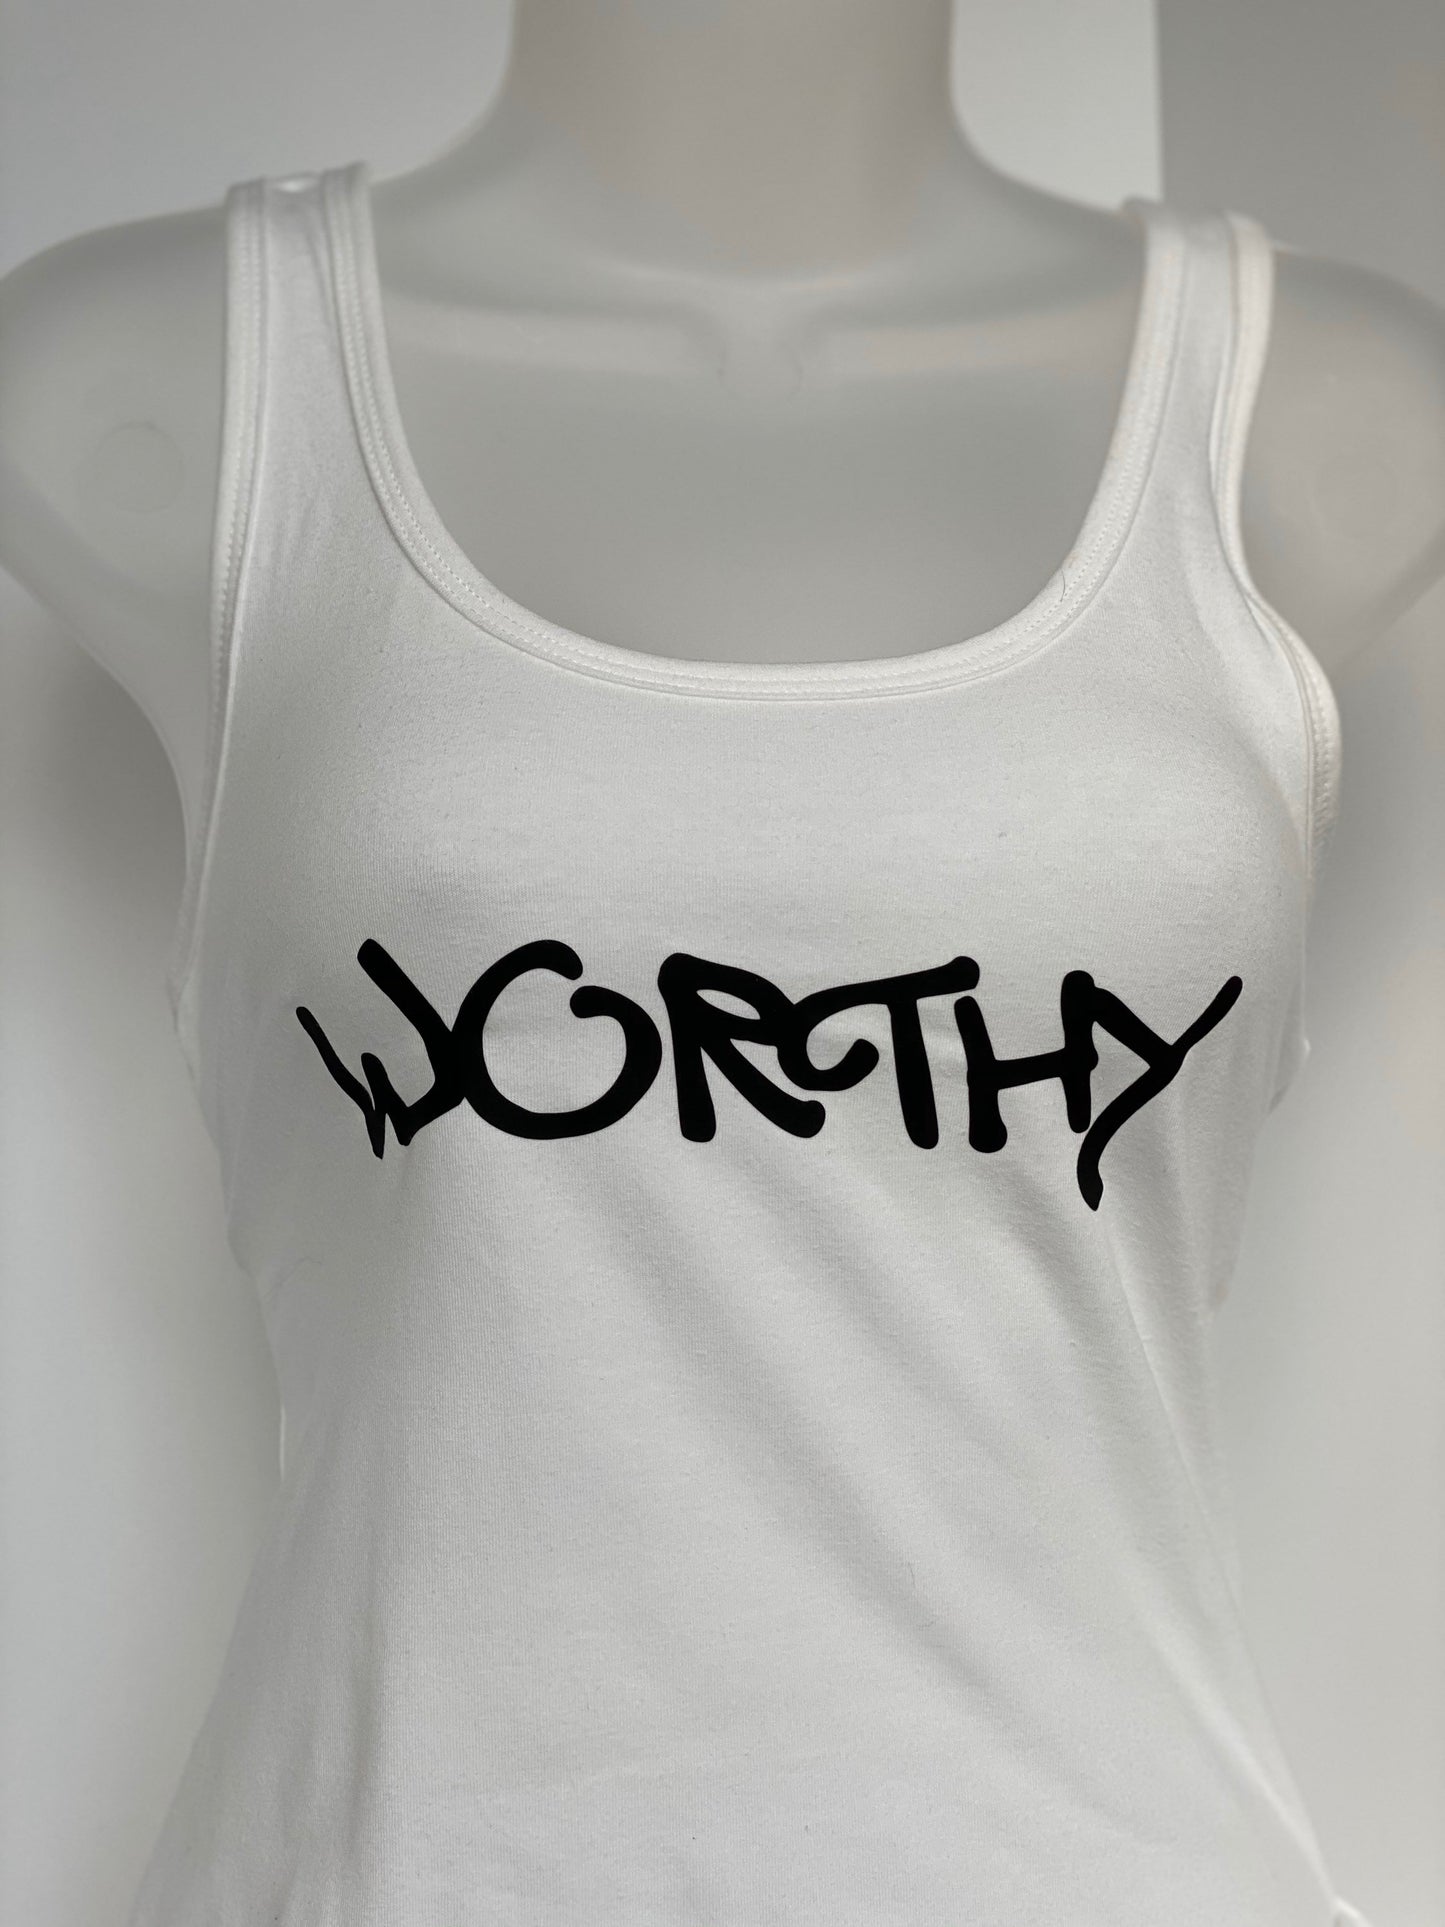 Worthy Tank, T-shirt, Hoodie, or Tote, positivity, self love, inspirational message hoodie